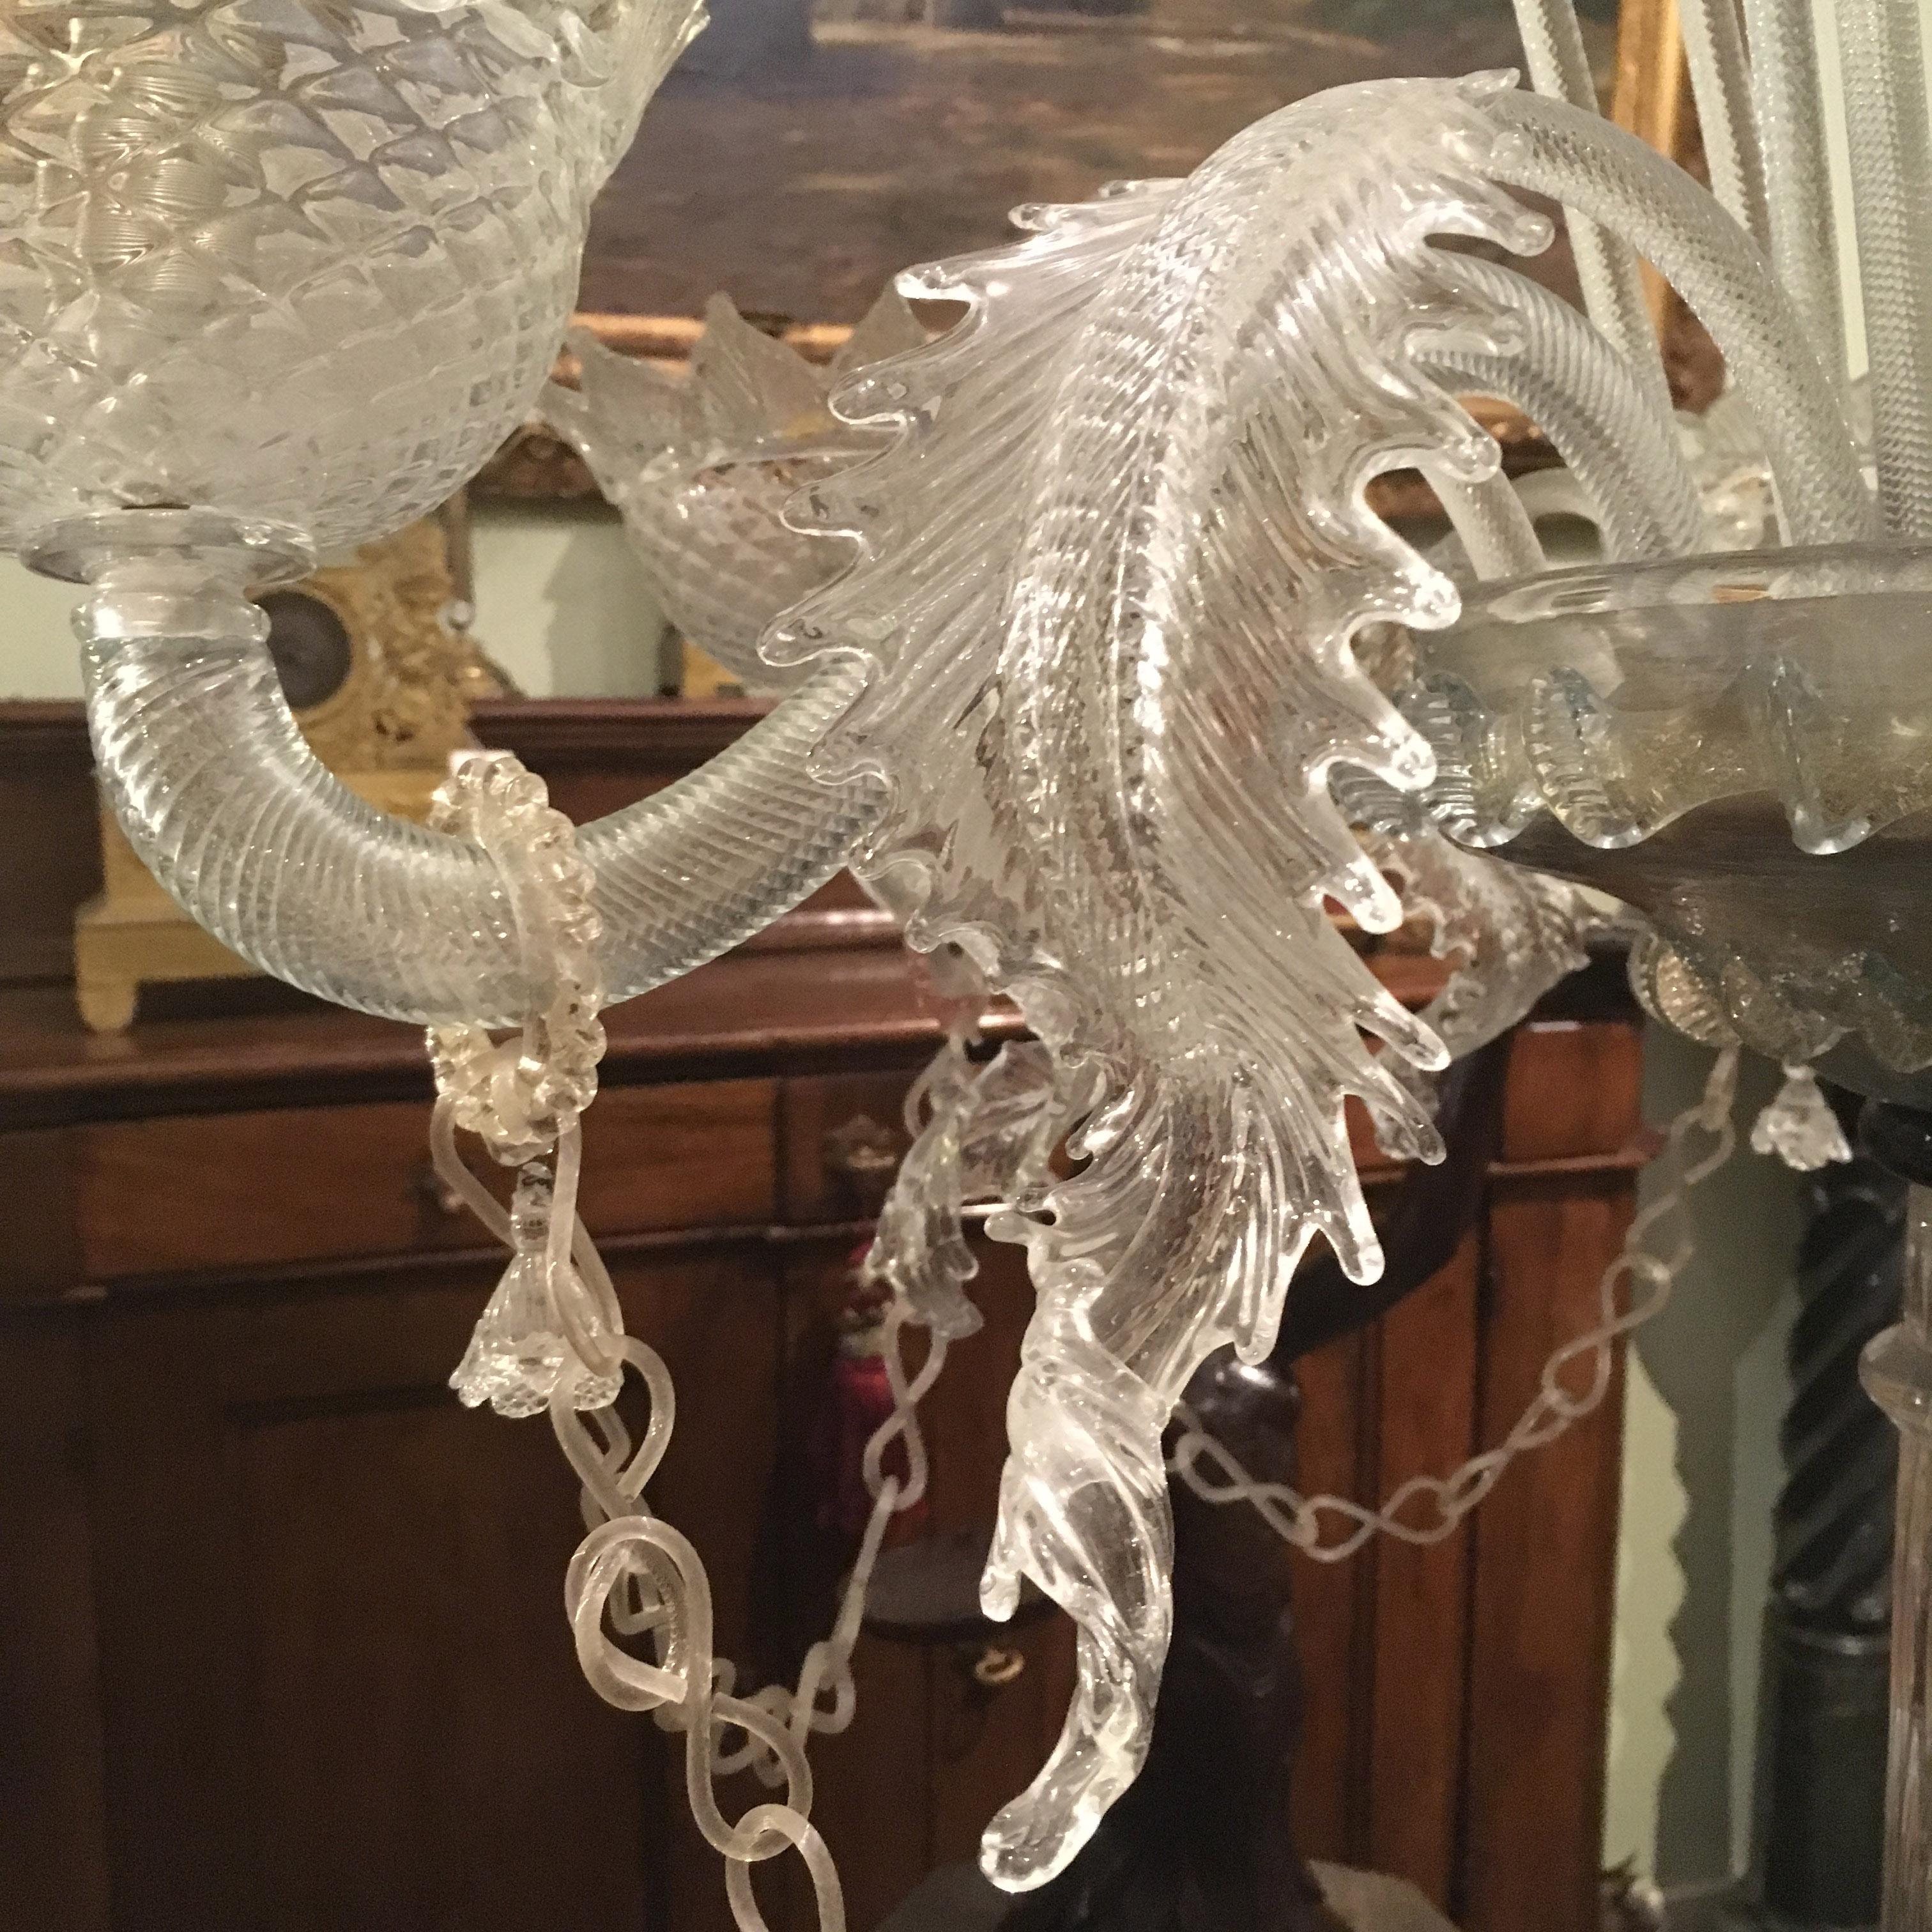 A charming and rare single Murano glass candelabra floor lamp.
The lamp presents the typical shape and details of Murano glass chandeliers, like flowers and leaves.
Six branches united by chains
Total of seven lights on two levels.
The lamp